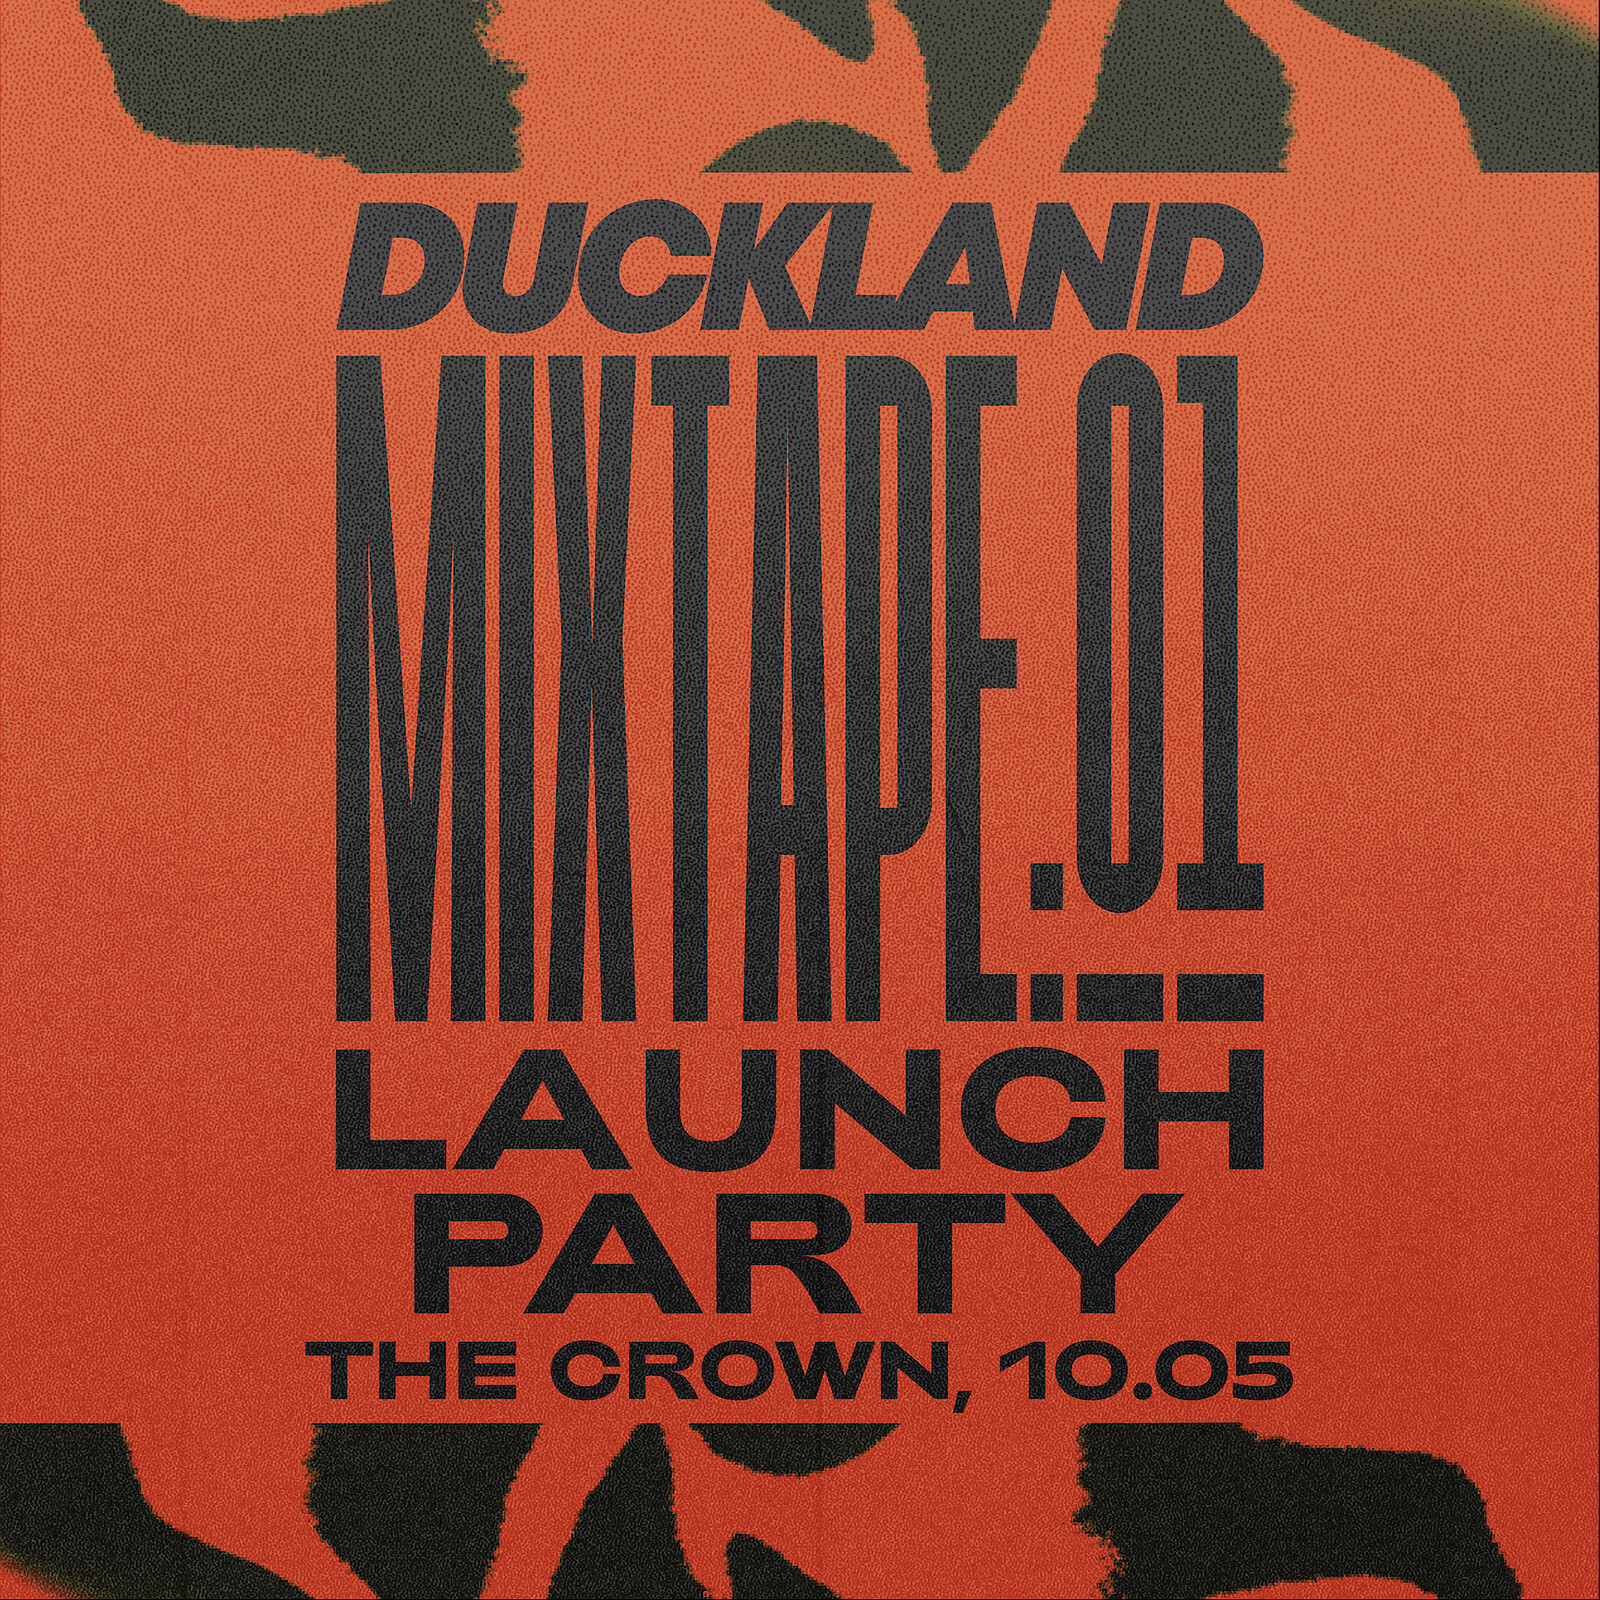 Duckland 039: MIXTAPE:01 - Launch Party at The Crown